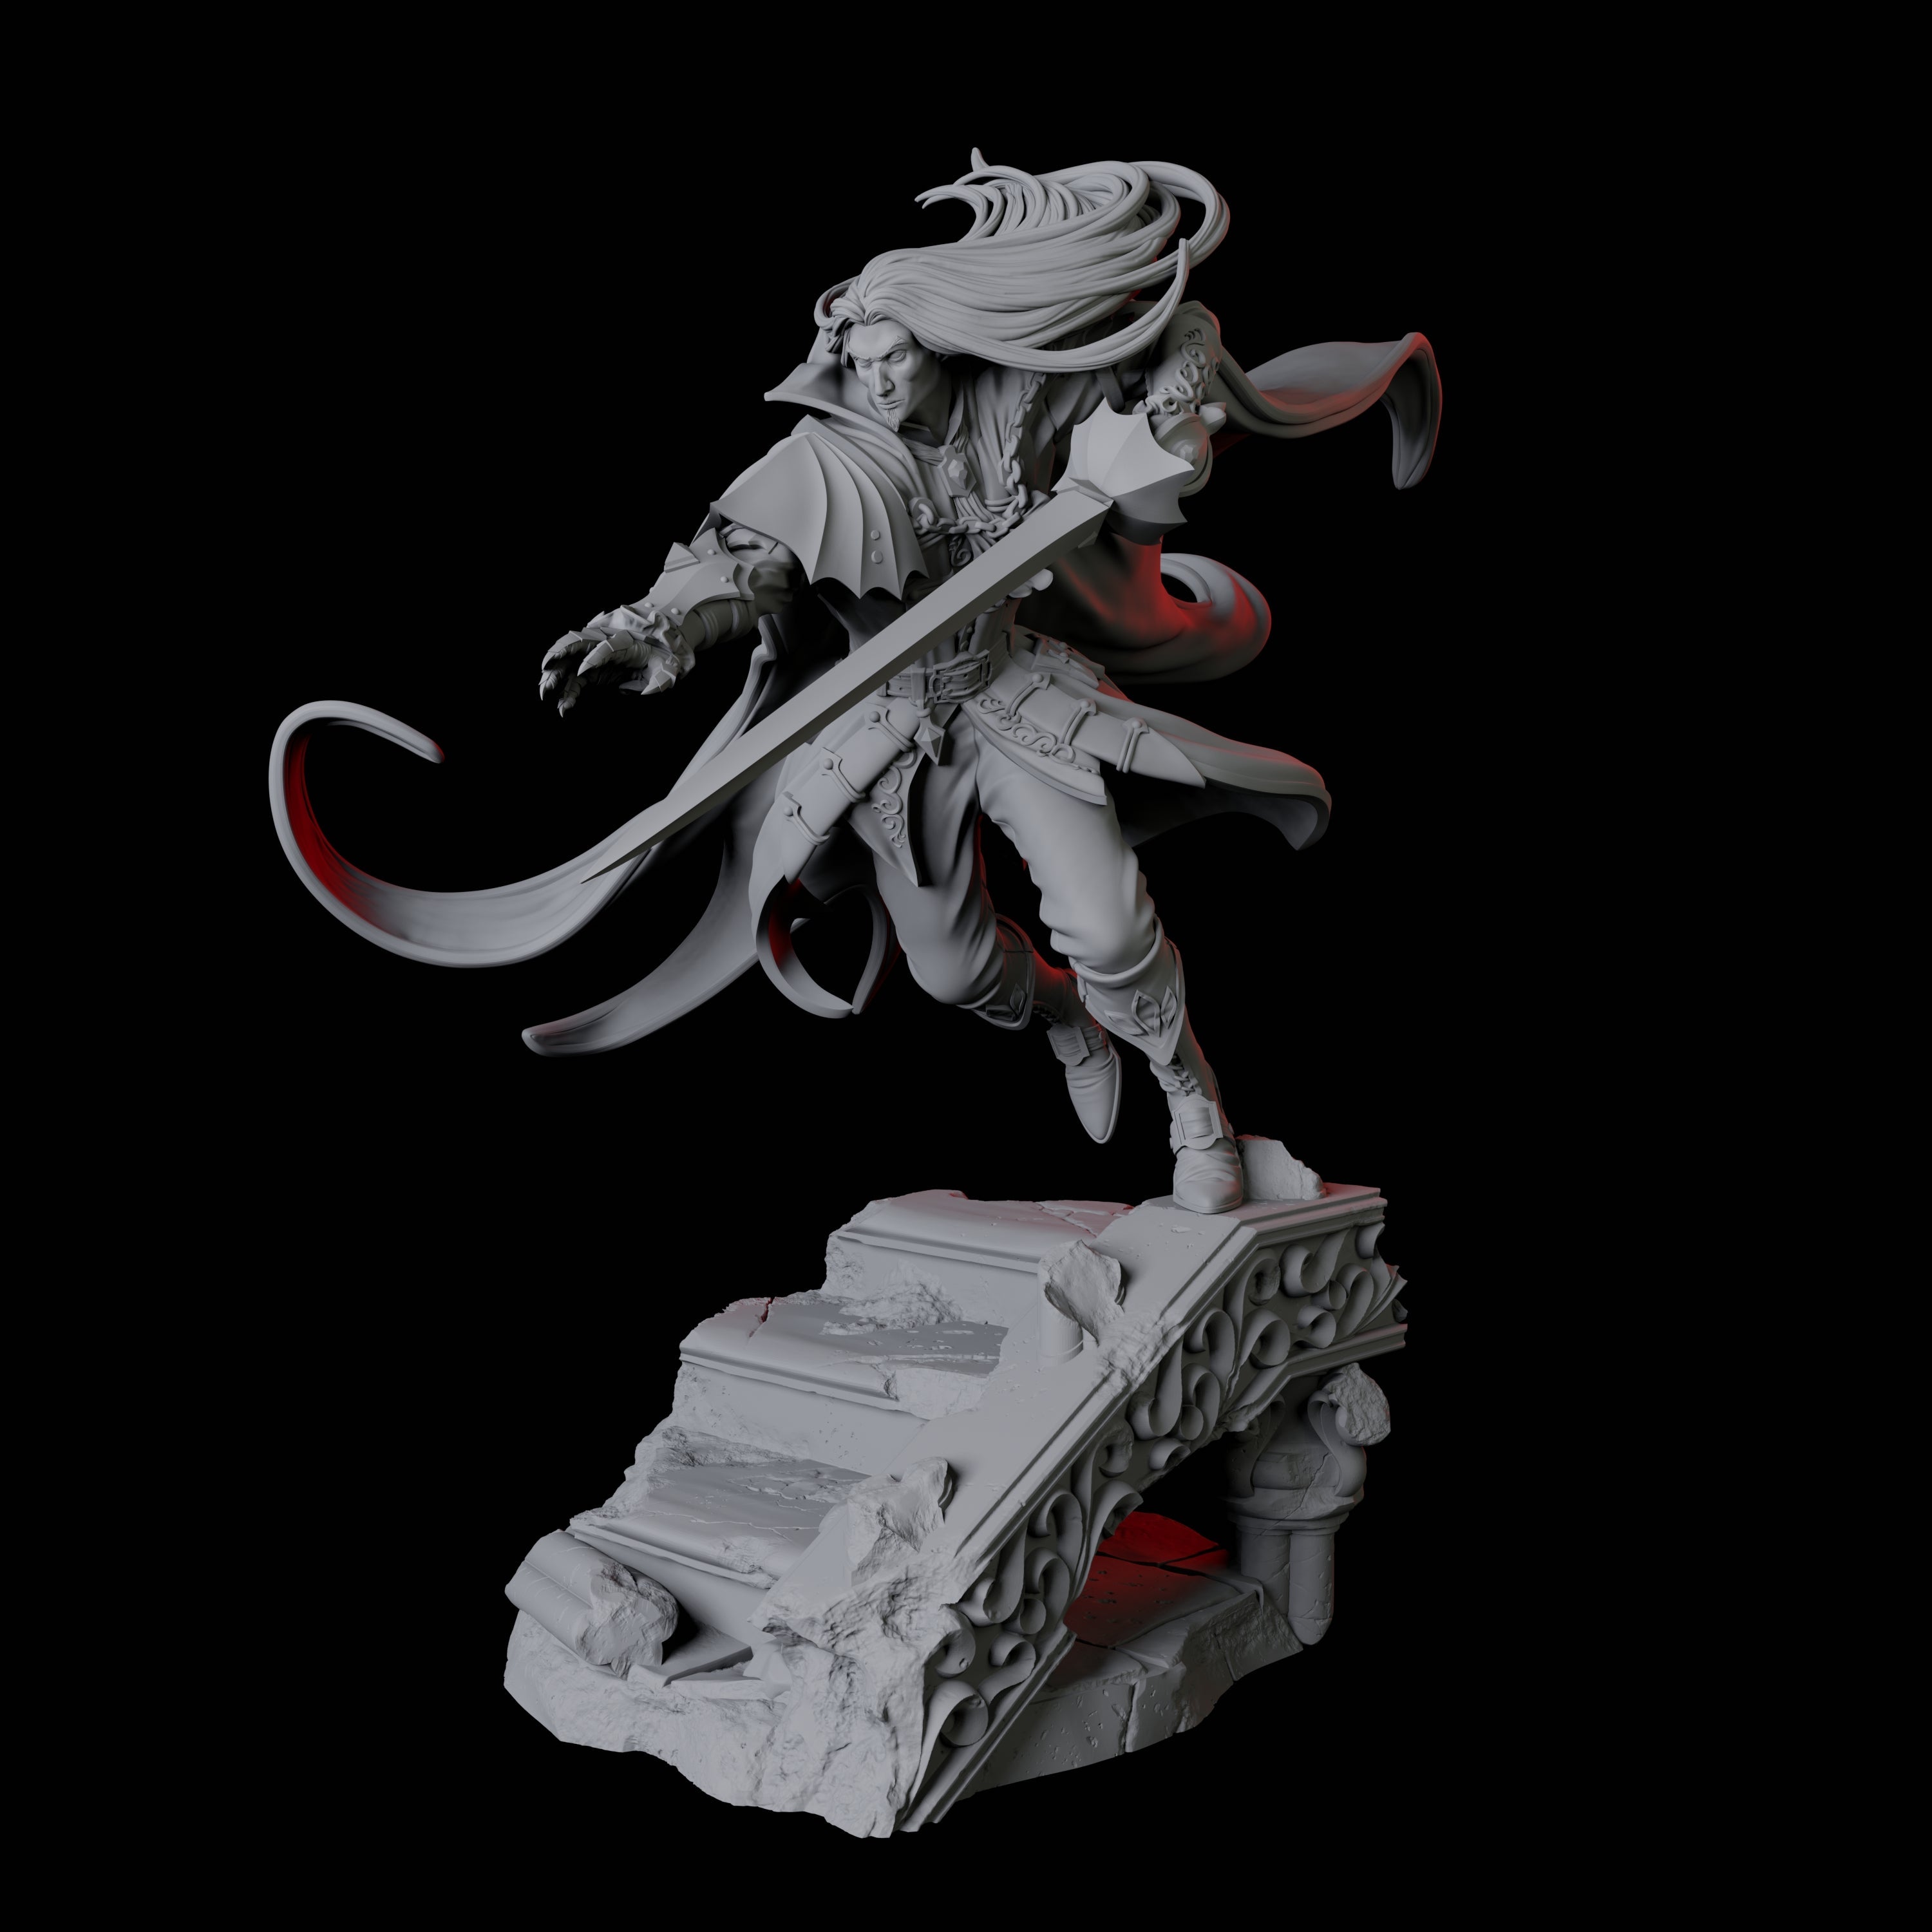 Leaping Swashbuckler Miniature for Dungeons and Dragons, Pathfinder or other TTRPGs